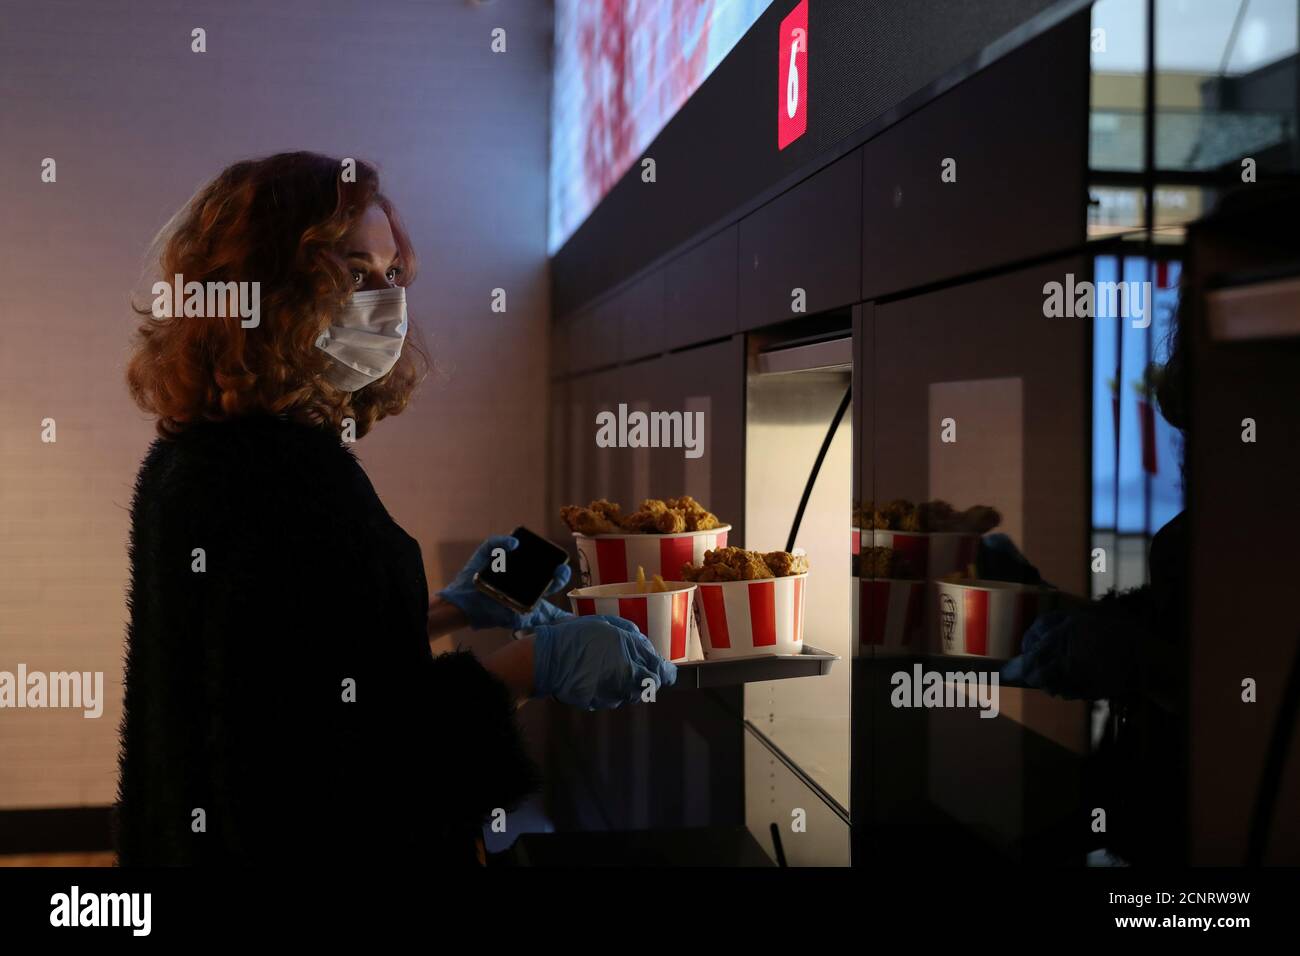 An employee wearing a protective face mask and gloves picks up a tray of food from a cubby, which opens automatically with a facial recognition system, at a KFC restaurant offering contactless service, ahead of its opening following the easing of restrictions implemented to curb the spread of the coronavirus disease (COVID-19) in Moscow, Russia June 21, 2020. REUTERS/Evgenia Novozhenina Stock Photo